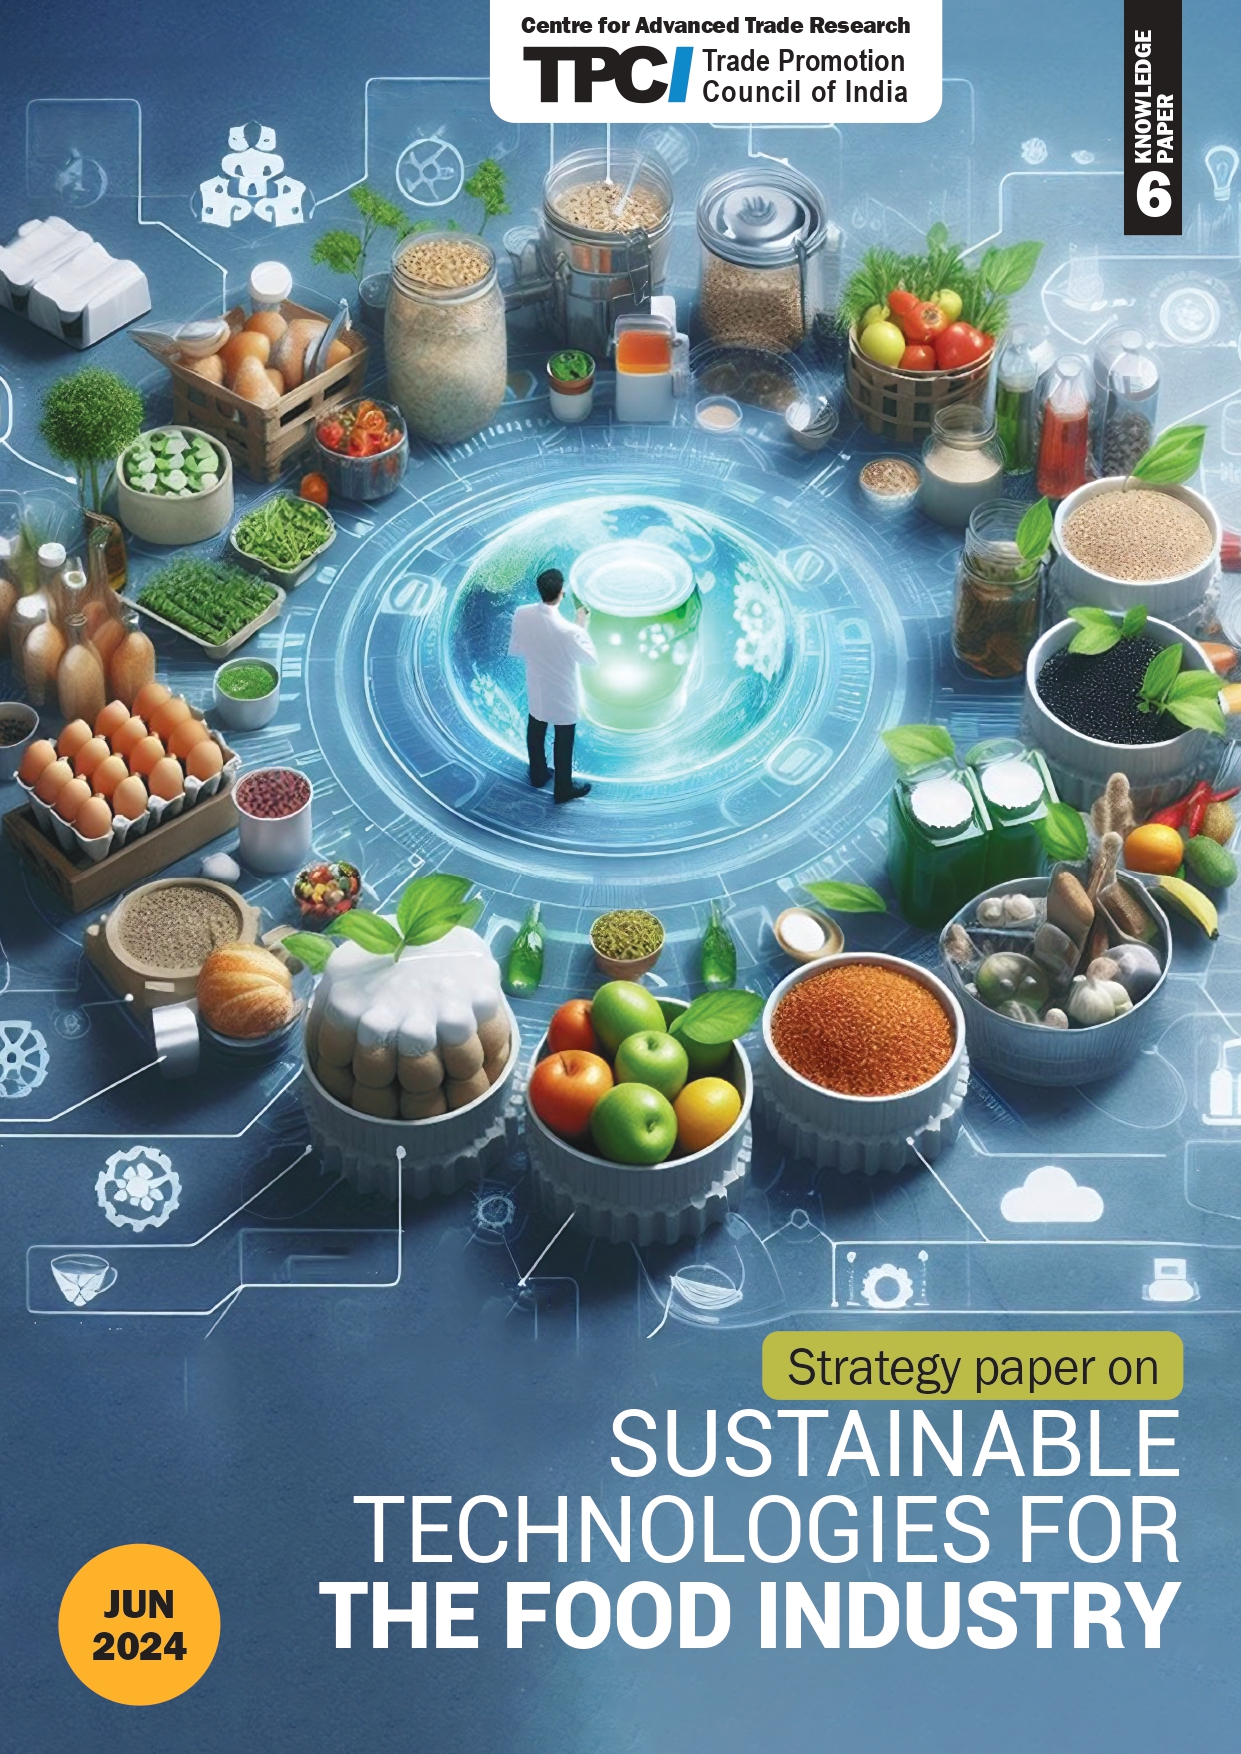 Sustainable technologies for the F&B industry